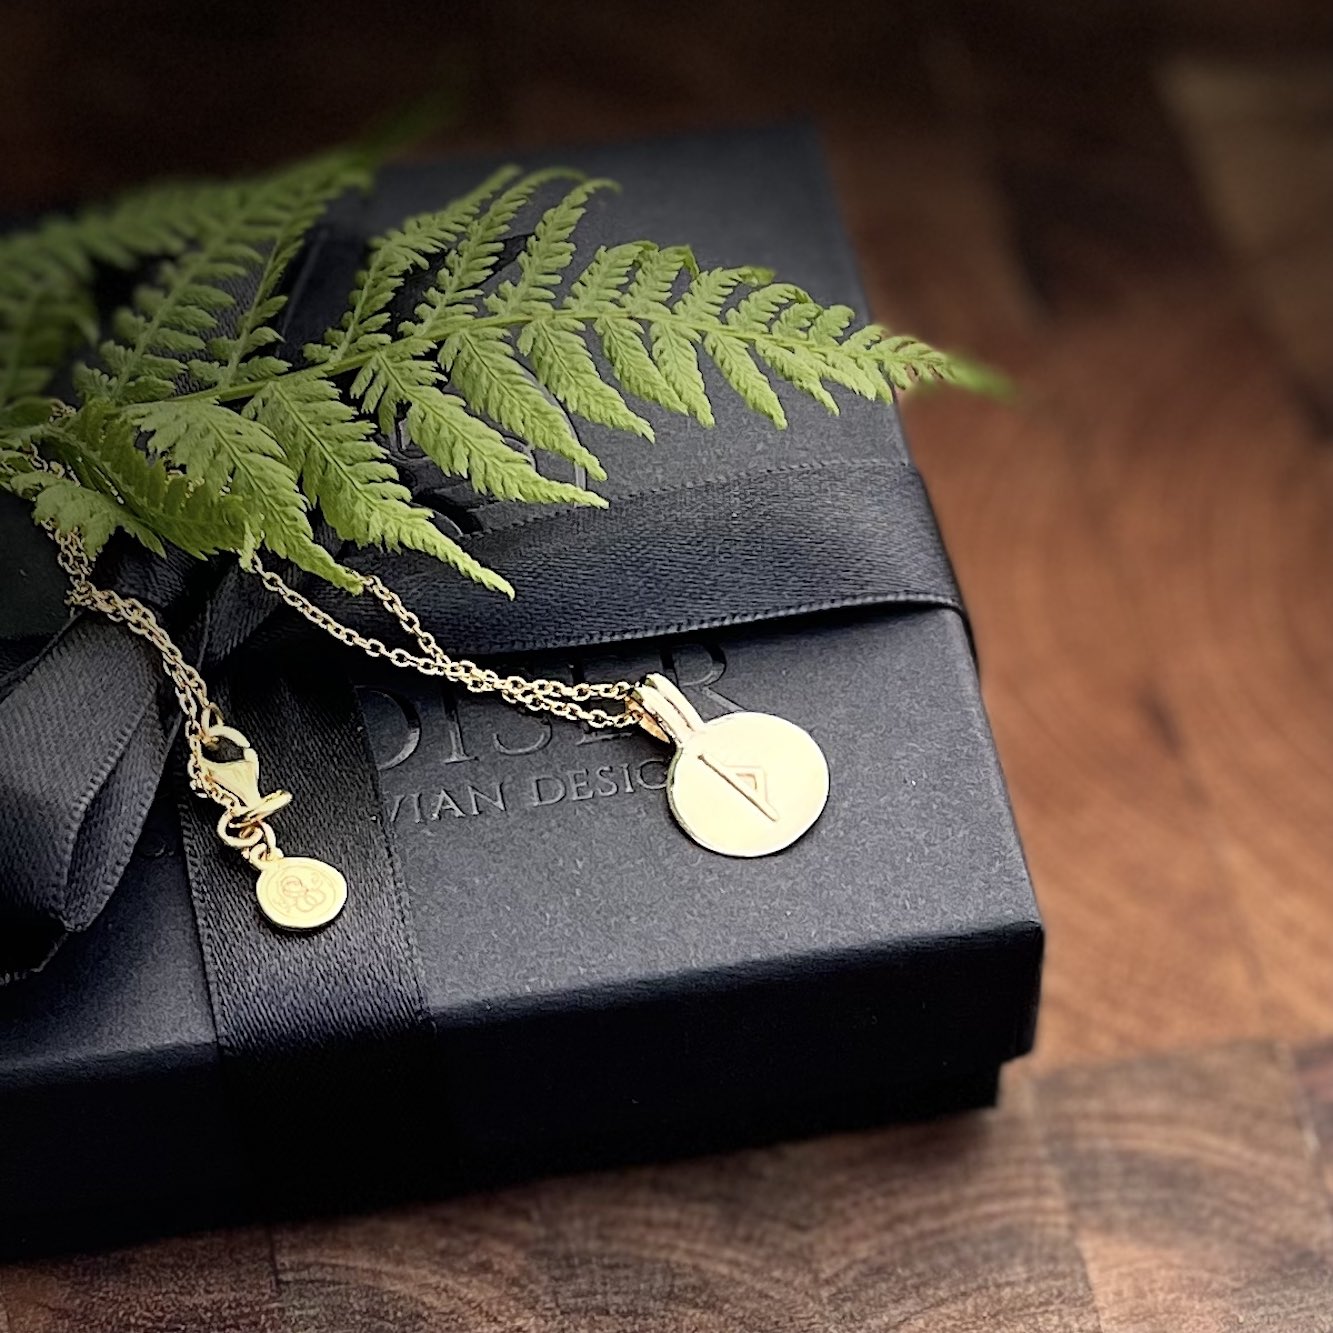 Soldiser Rune Pendant Thurs Gold Necklace on Gift Box with Fern